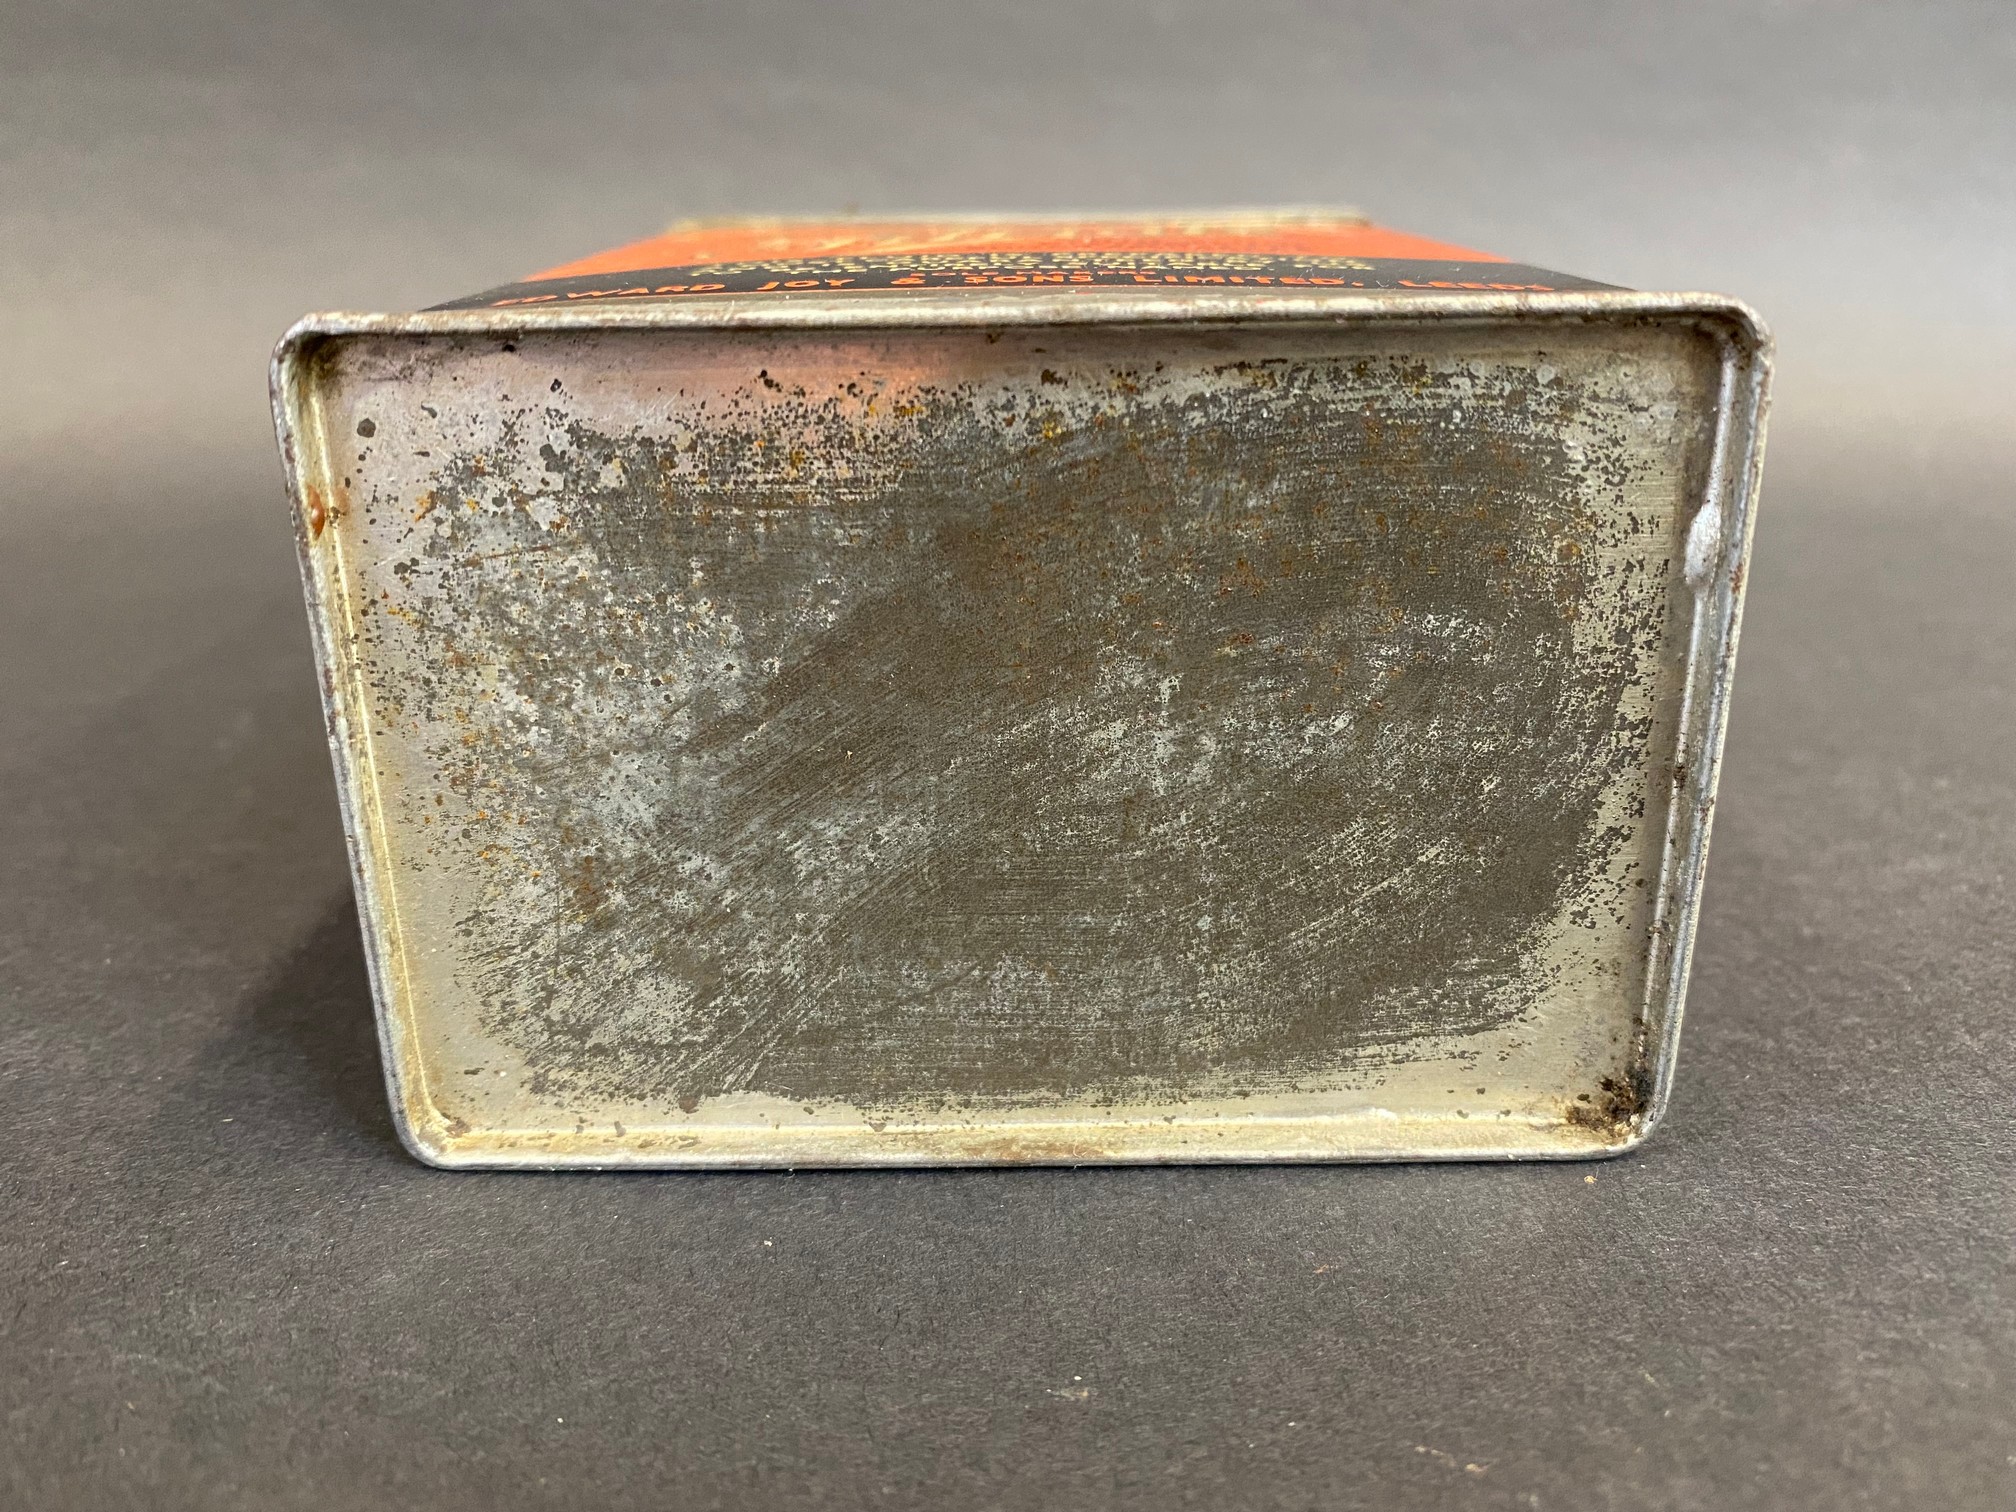 A small Filtrate rectangular can in quite superb condition and unusual orange colourway. - Image 6 of 6